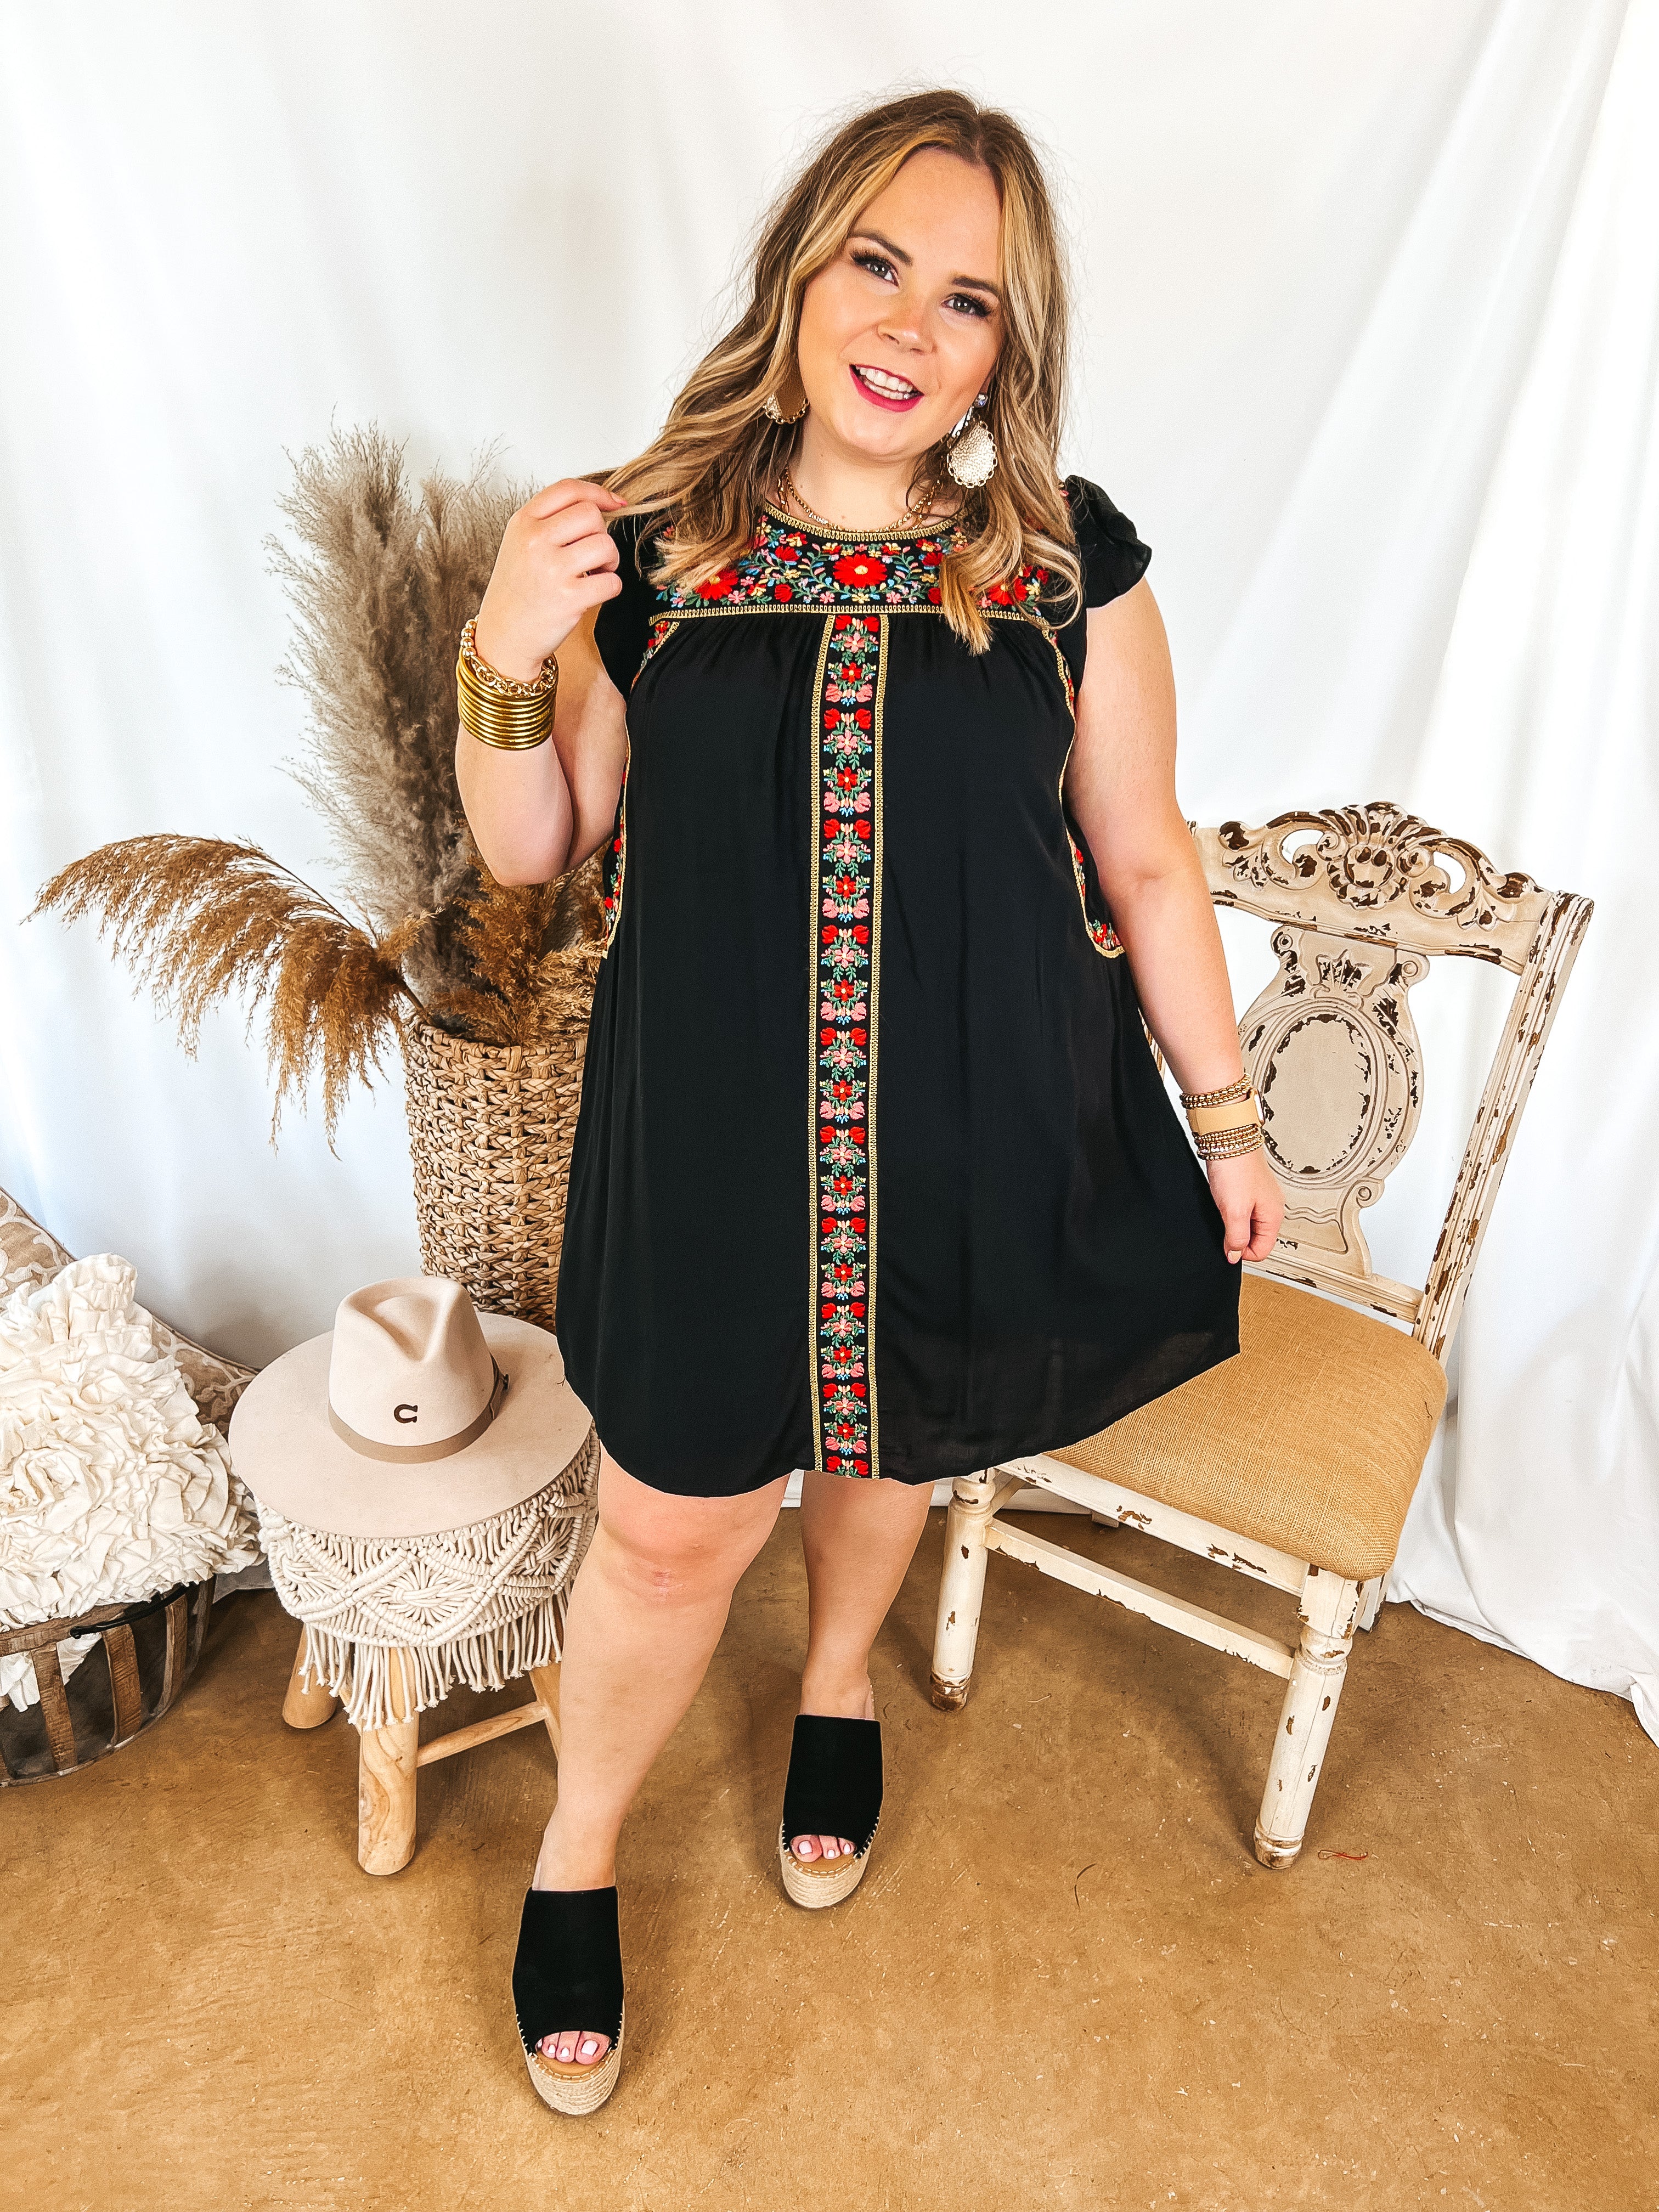 Last Chance Size Small | Enchanting Ways Embroidered Dress with Ruffle Cap Sleeves in Black - Giddy Up Glamour Boutique